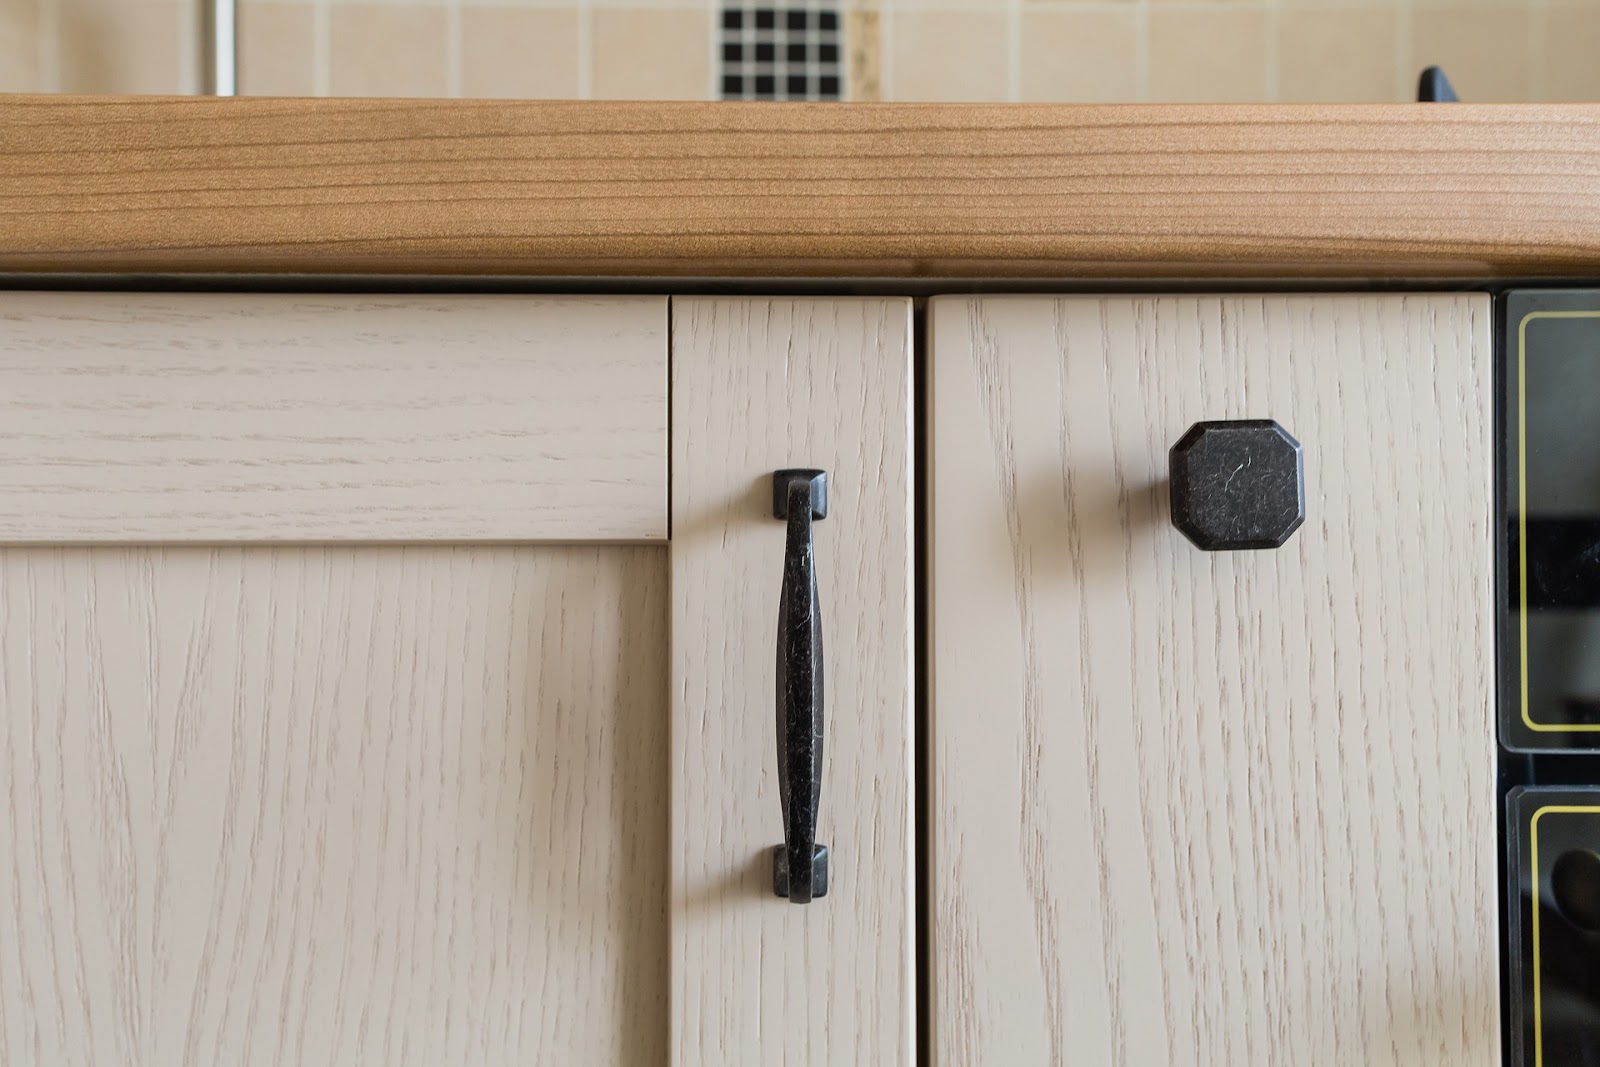 Cabinet door handles for accessibility.